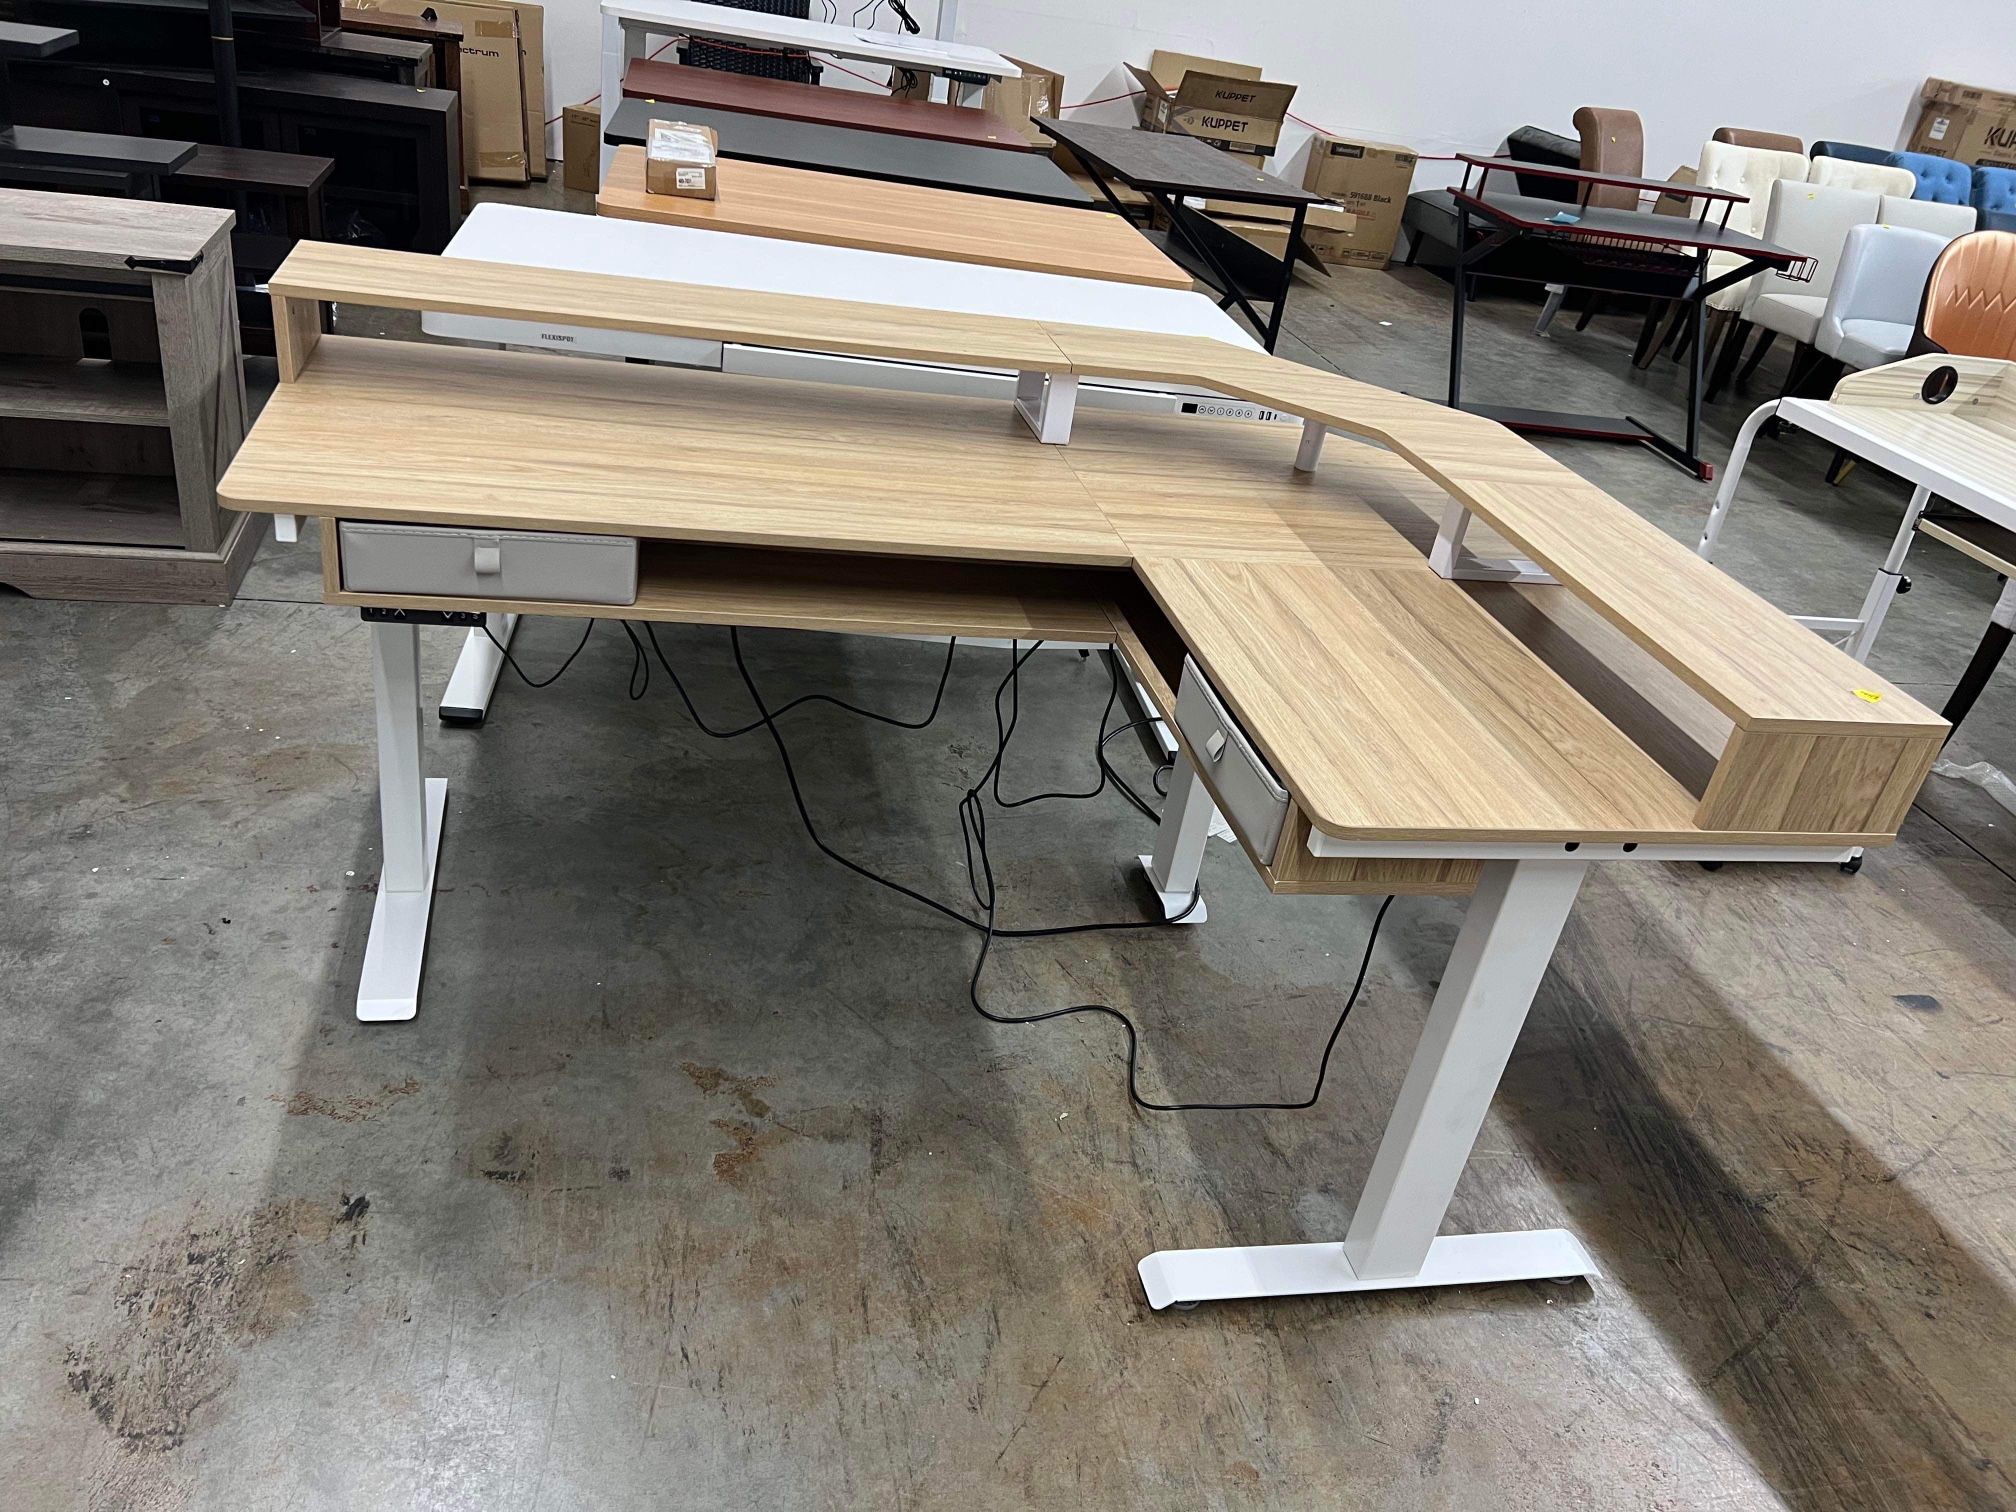 Triple Motor L-shaped Standing Desk with Multi-Storage(small damage)